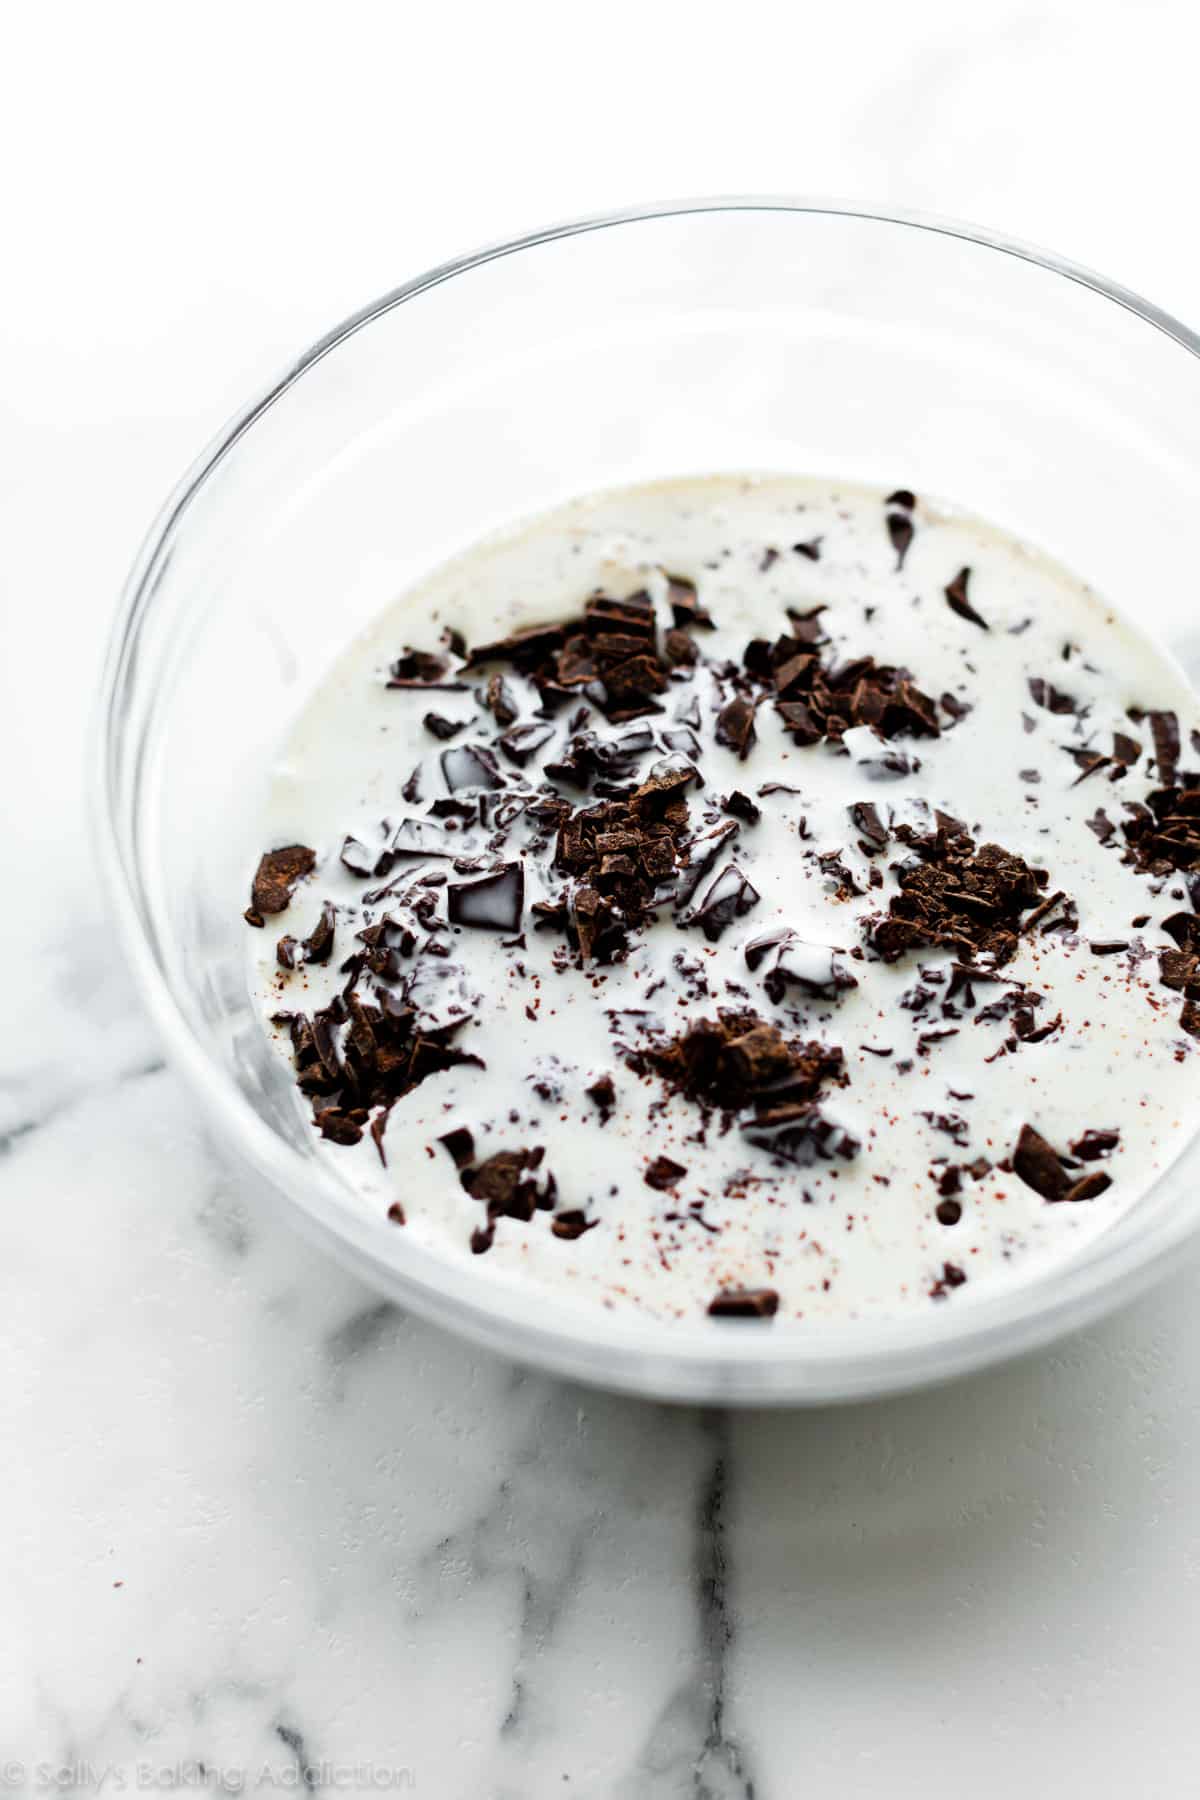 warm cream and chopped chocolate in a glass bowl